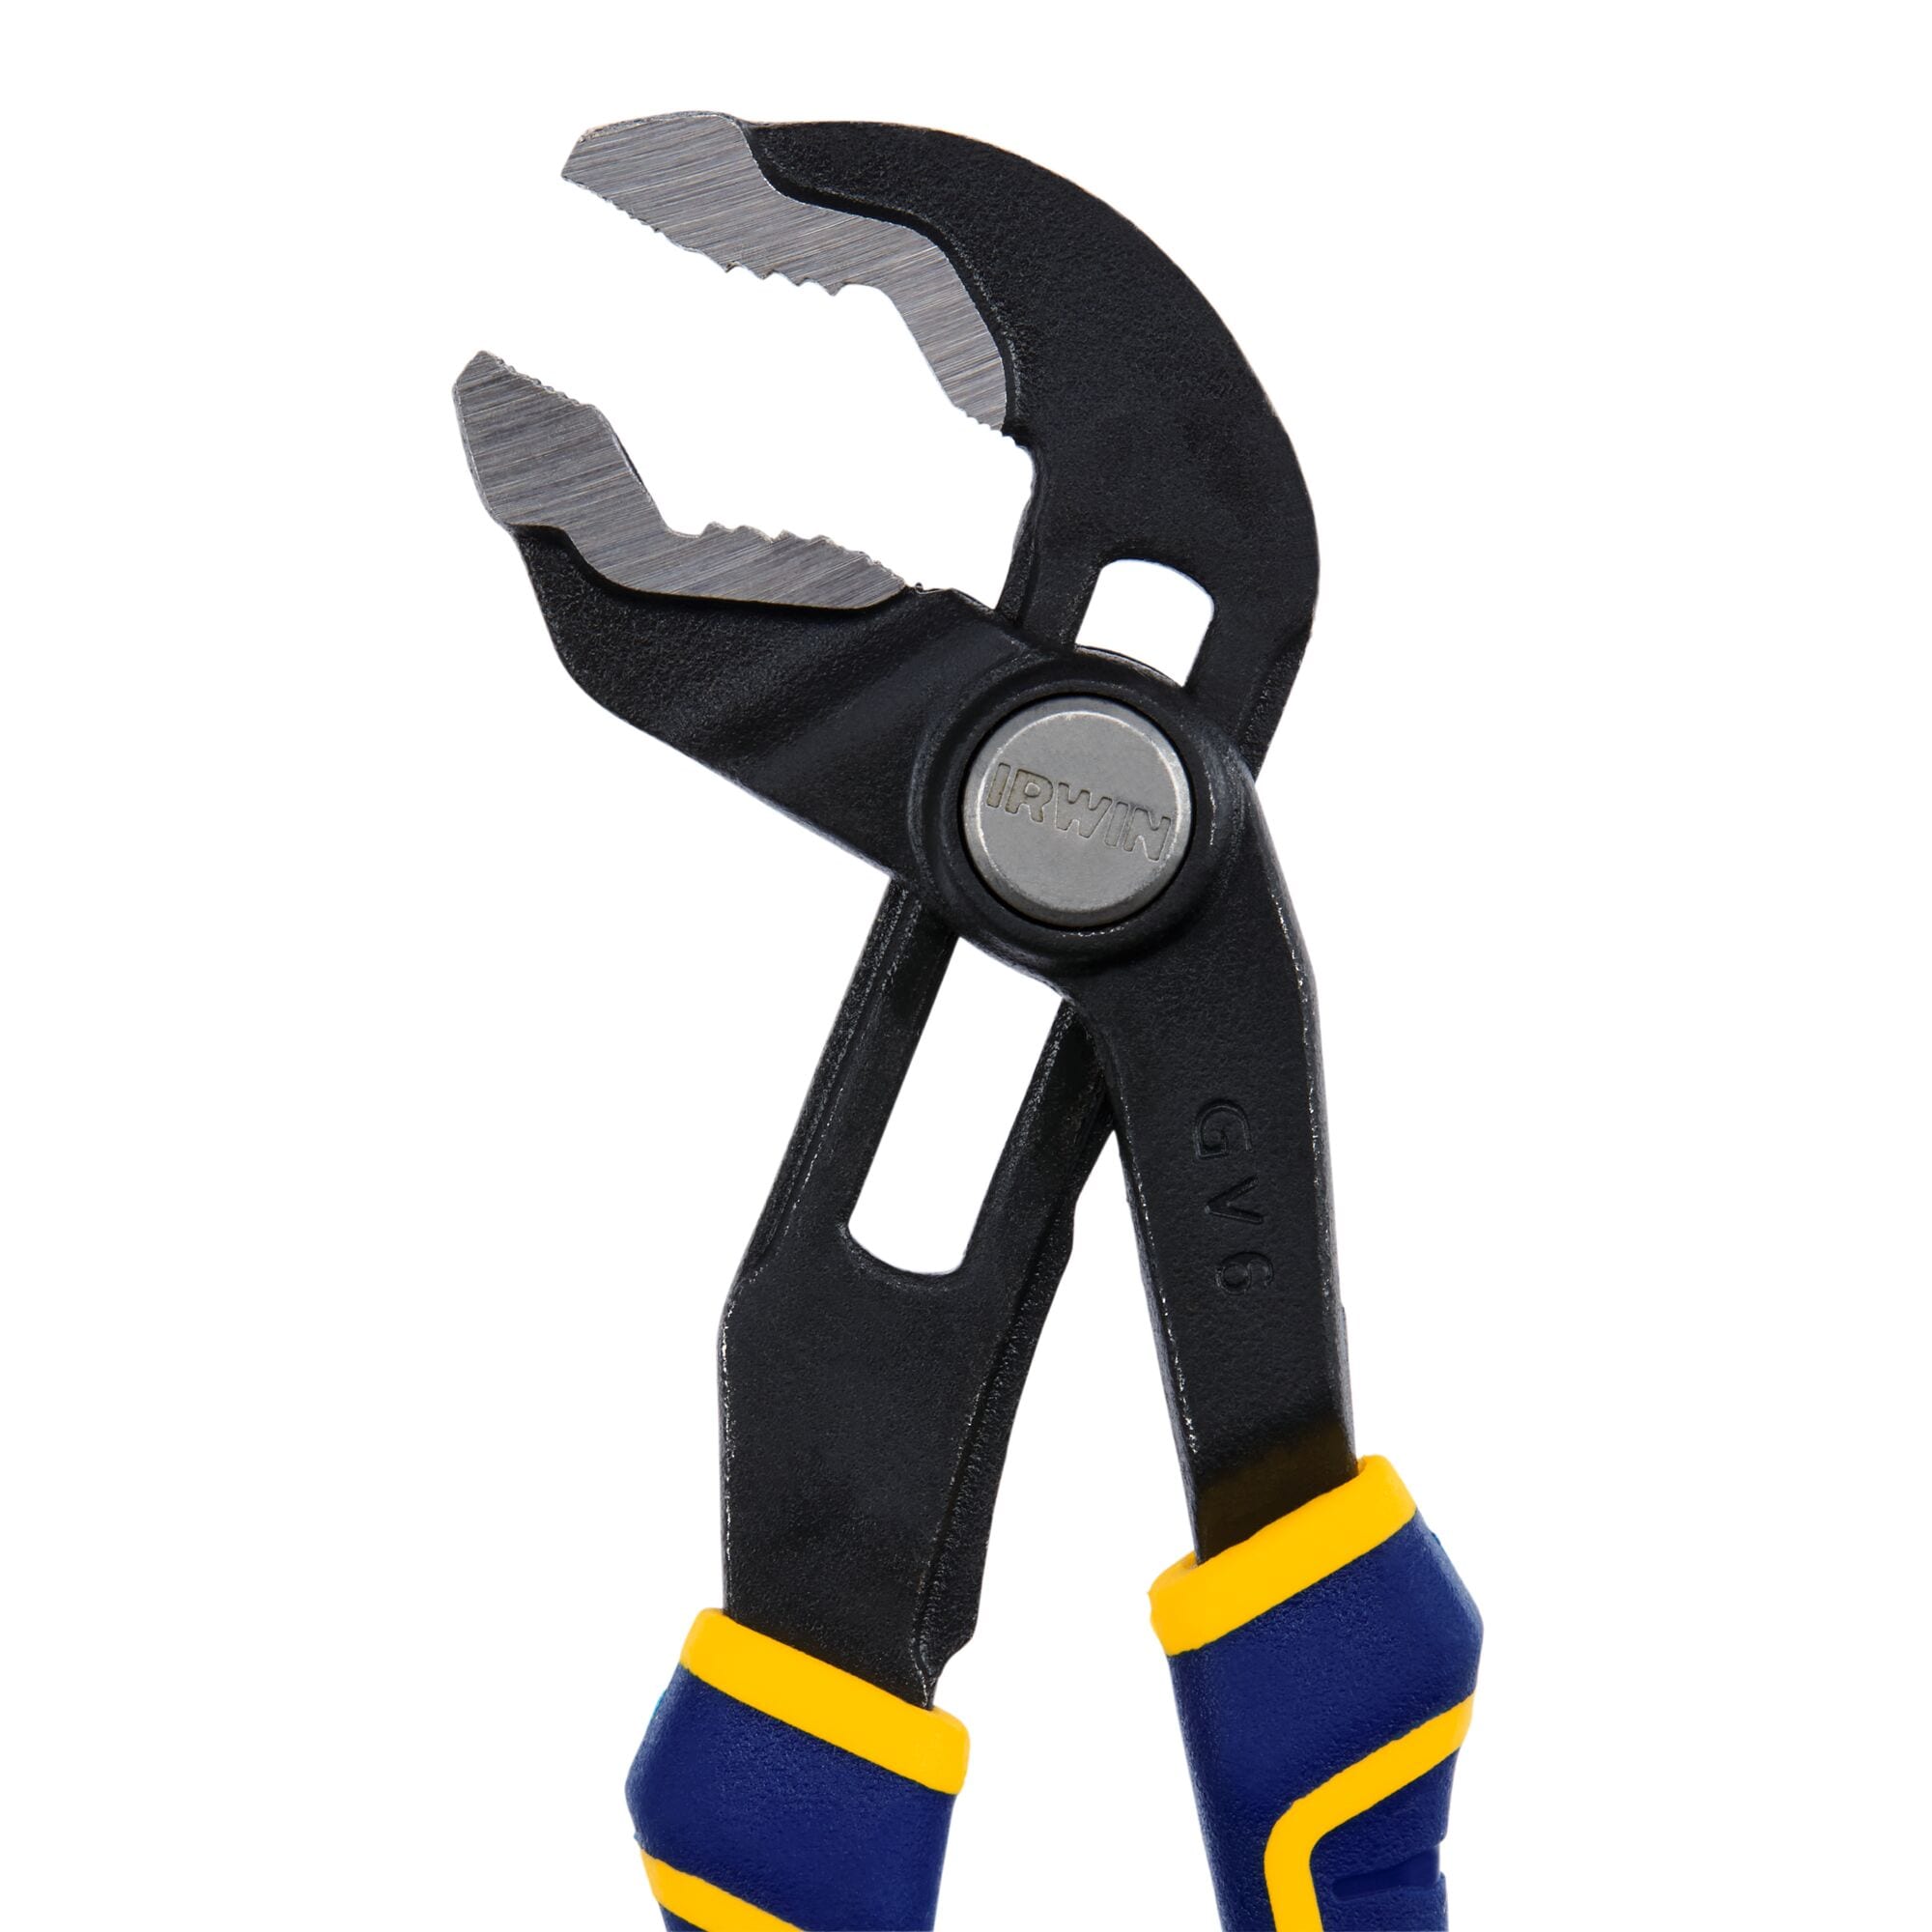 Tool Cookie Cutter Set - 5 Piece - 4 in Screw Driver, 4 in Wrench, 4.5 in  Pliers, 4.75 in Hammer, 5.25 in Saw